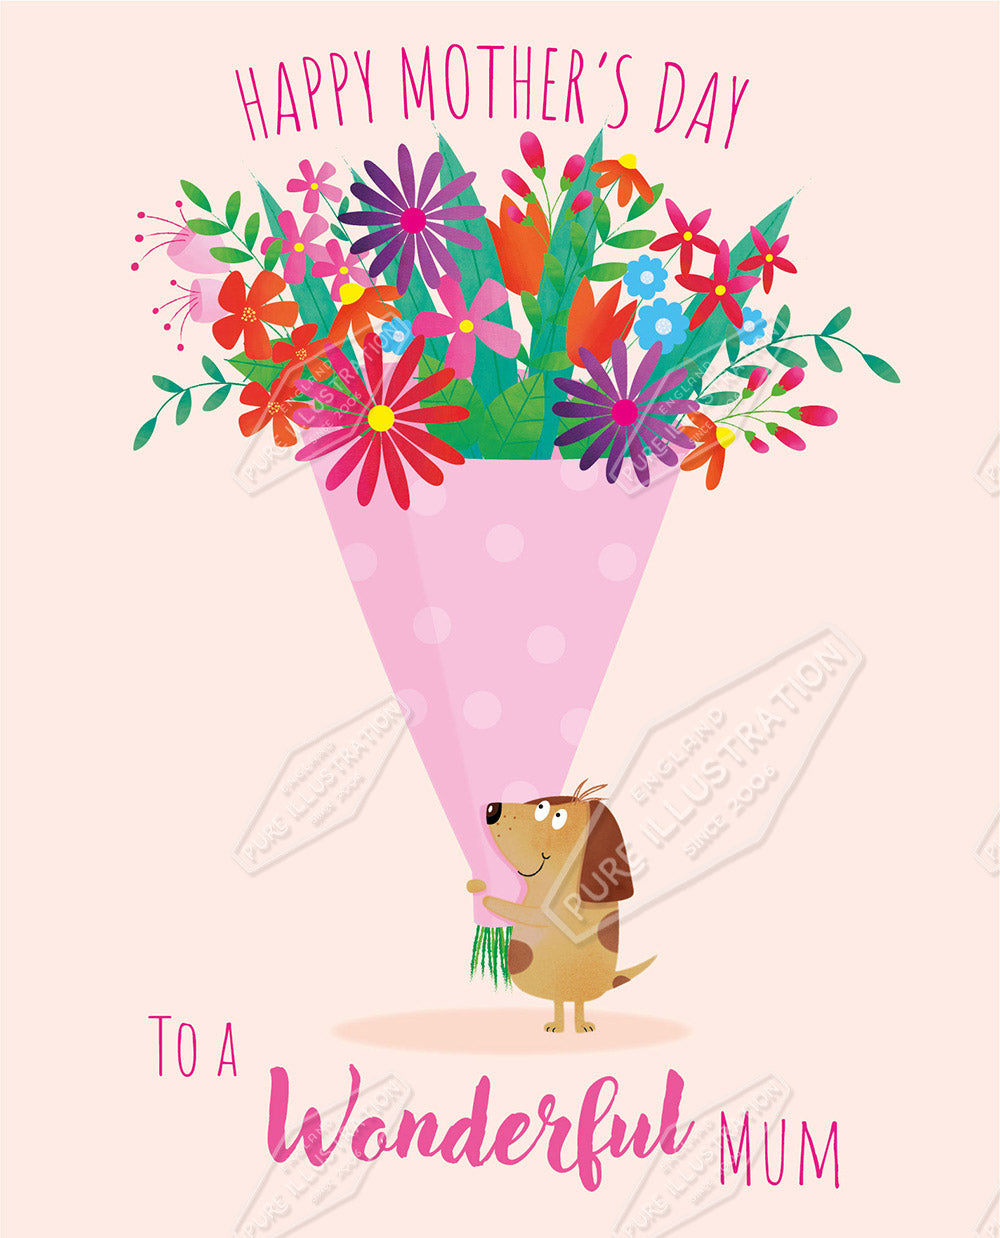 00035556SPI - Mother's Day Bouquet Illustration Greeting Card Design - Sarah Pitt is represented by Pure Art Licensing Agency - Mother's Day Greeting Card